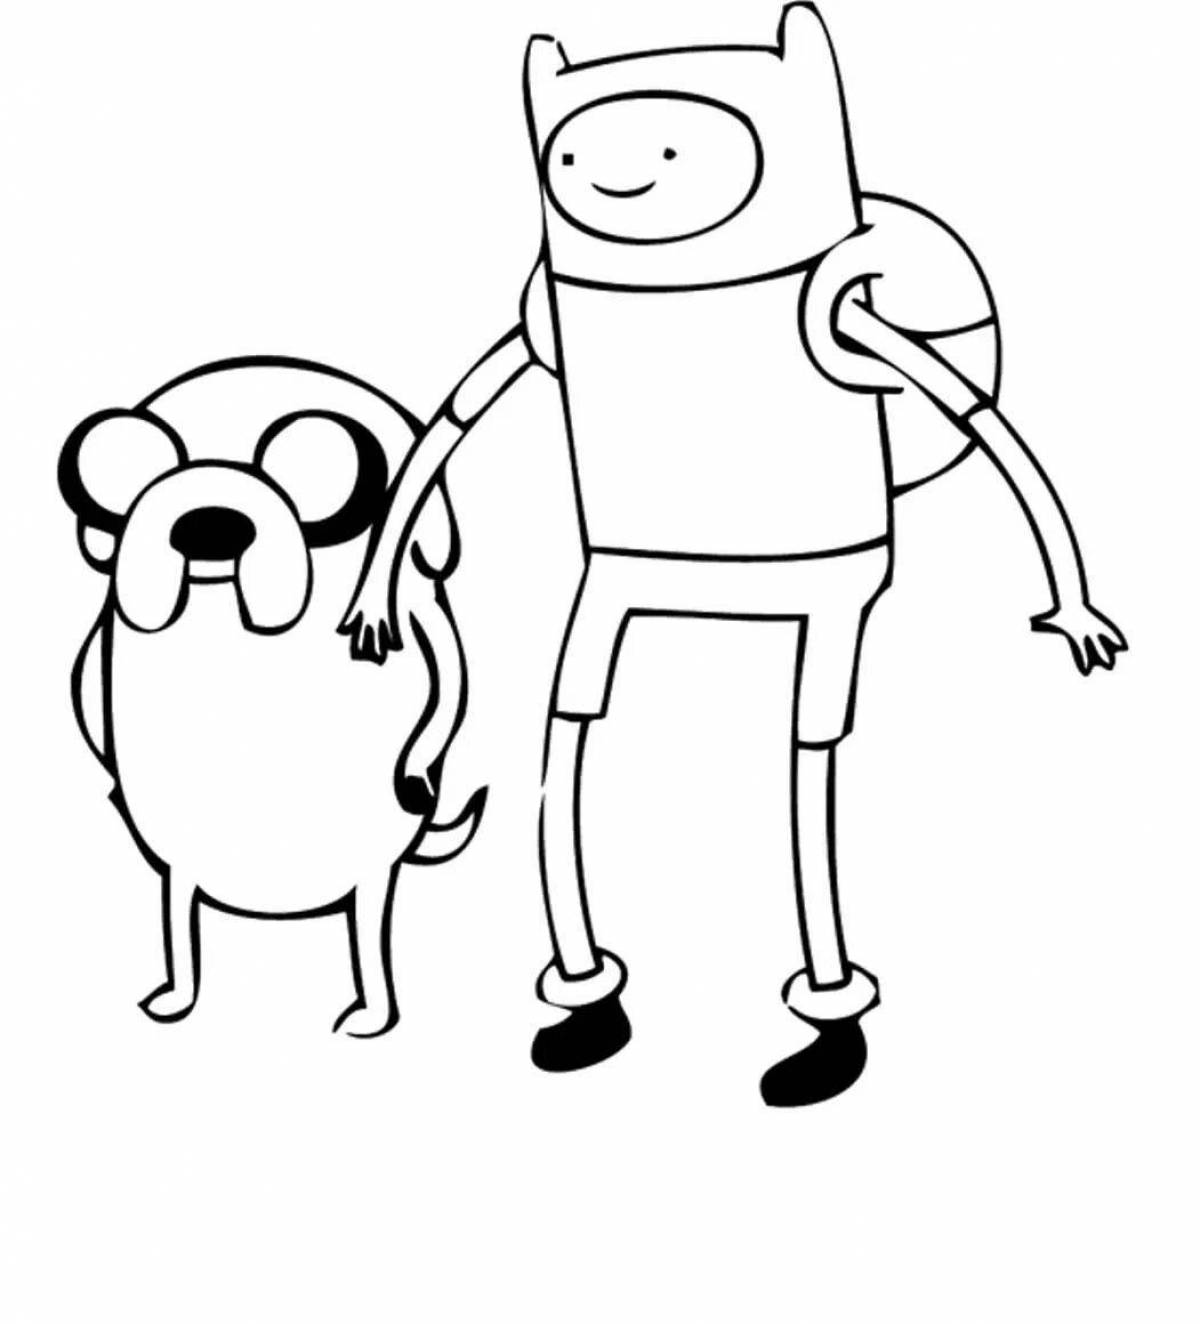 Fin and jake adventure time